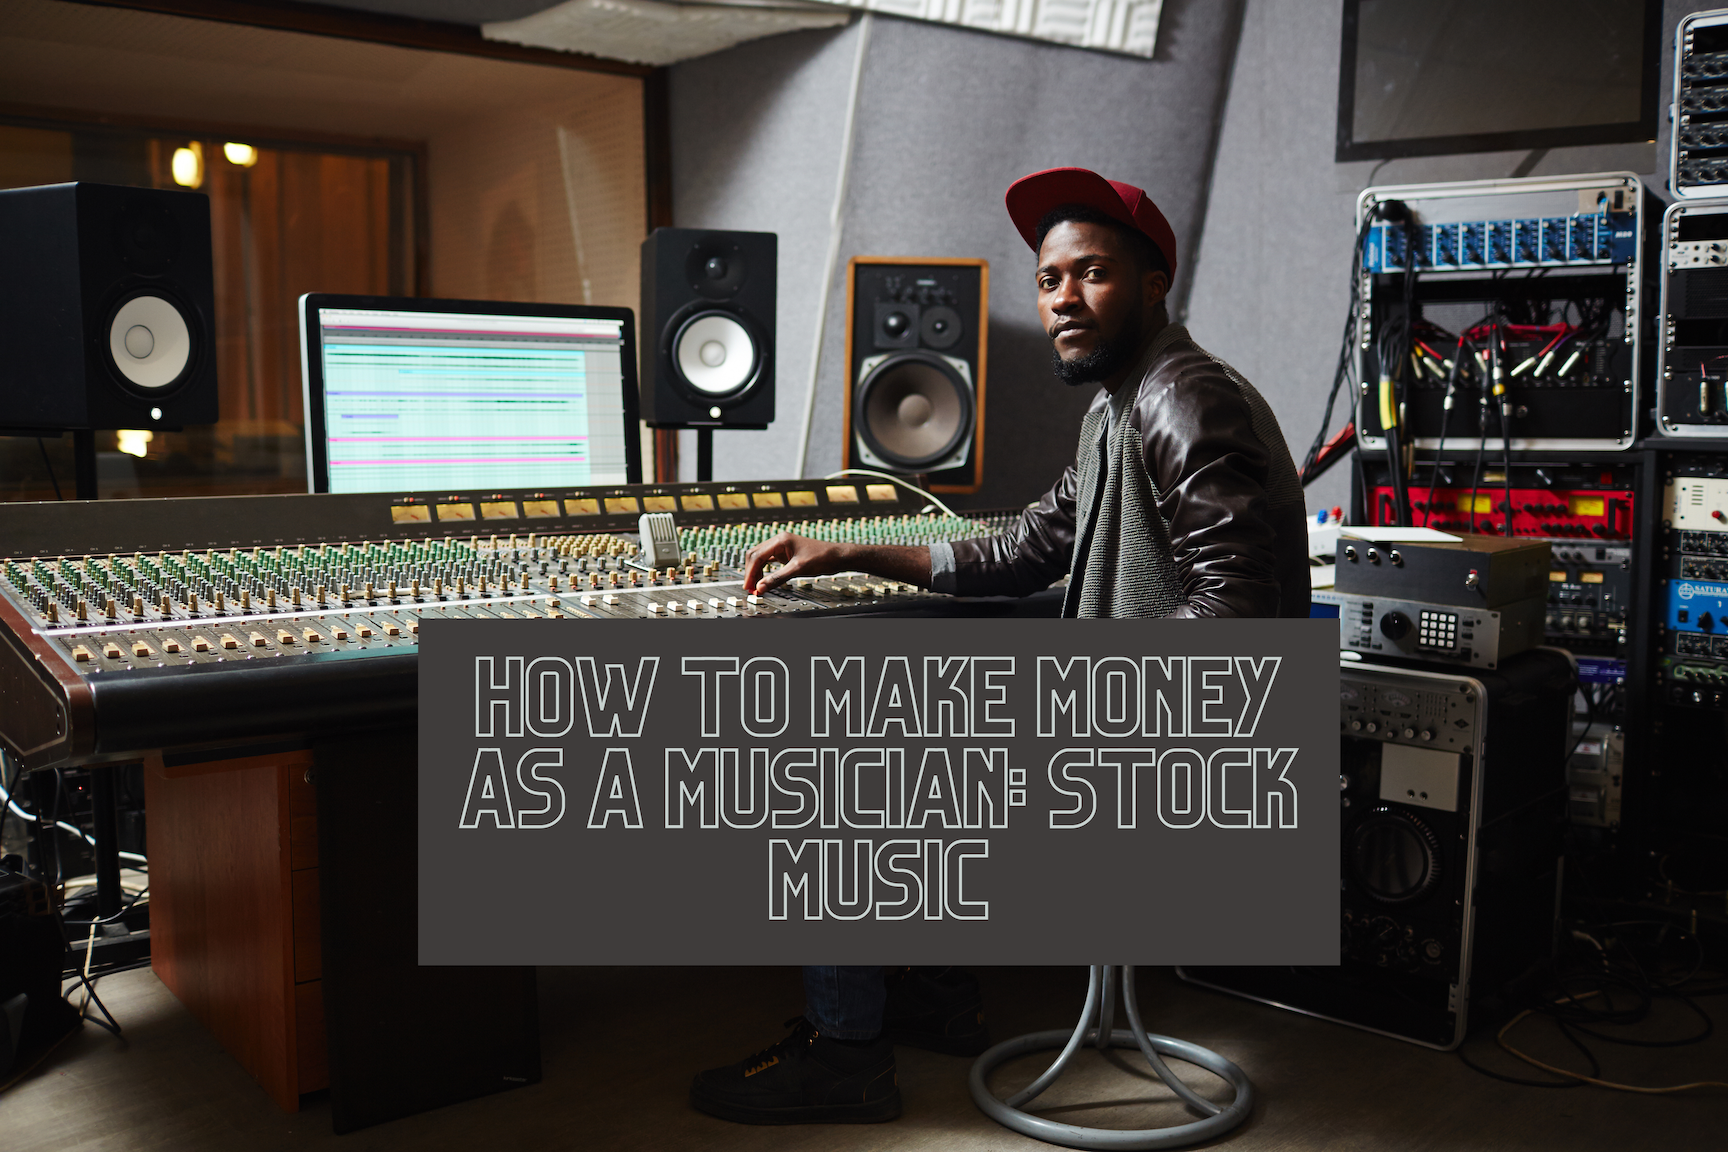 How to Make Money as a Musician Stock Music 2